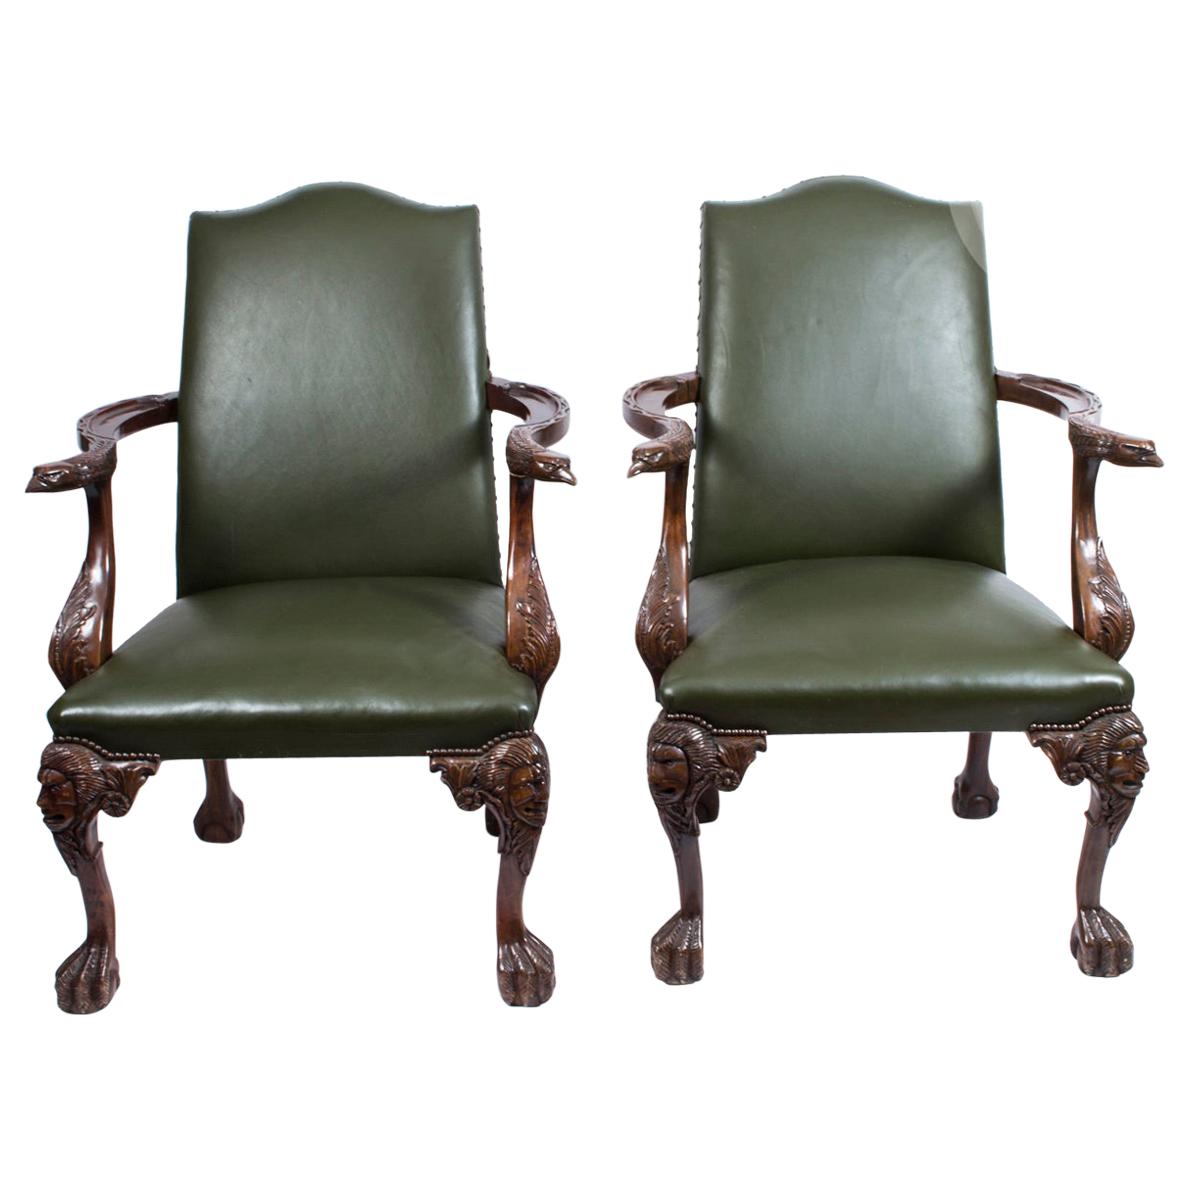 Vintage Pair of Eagle Leather Library Chairs Armchairs, Mid-20th Century